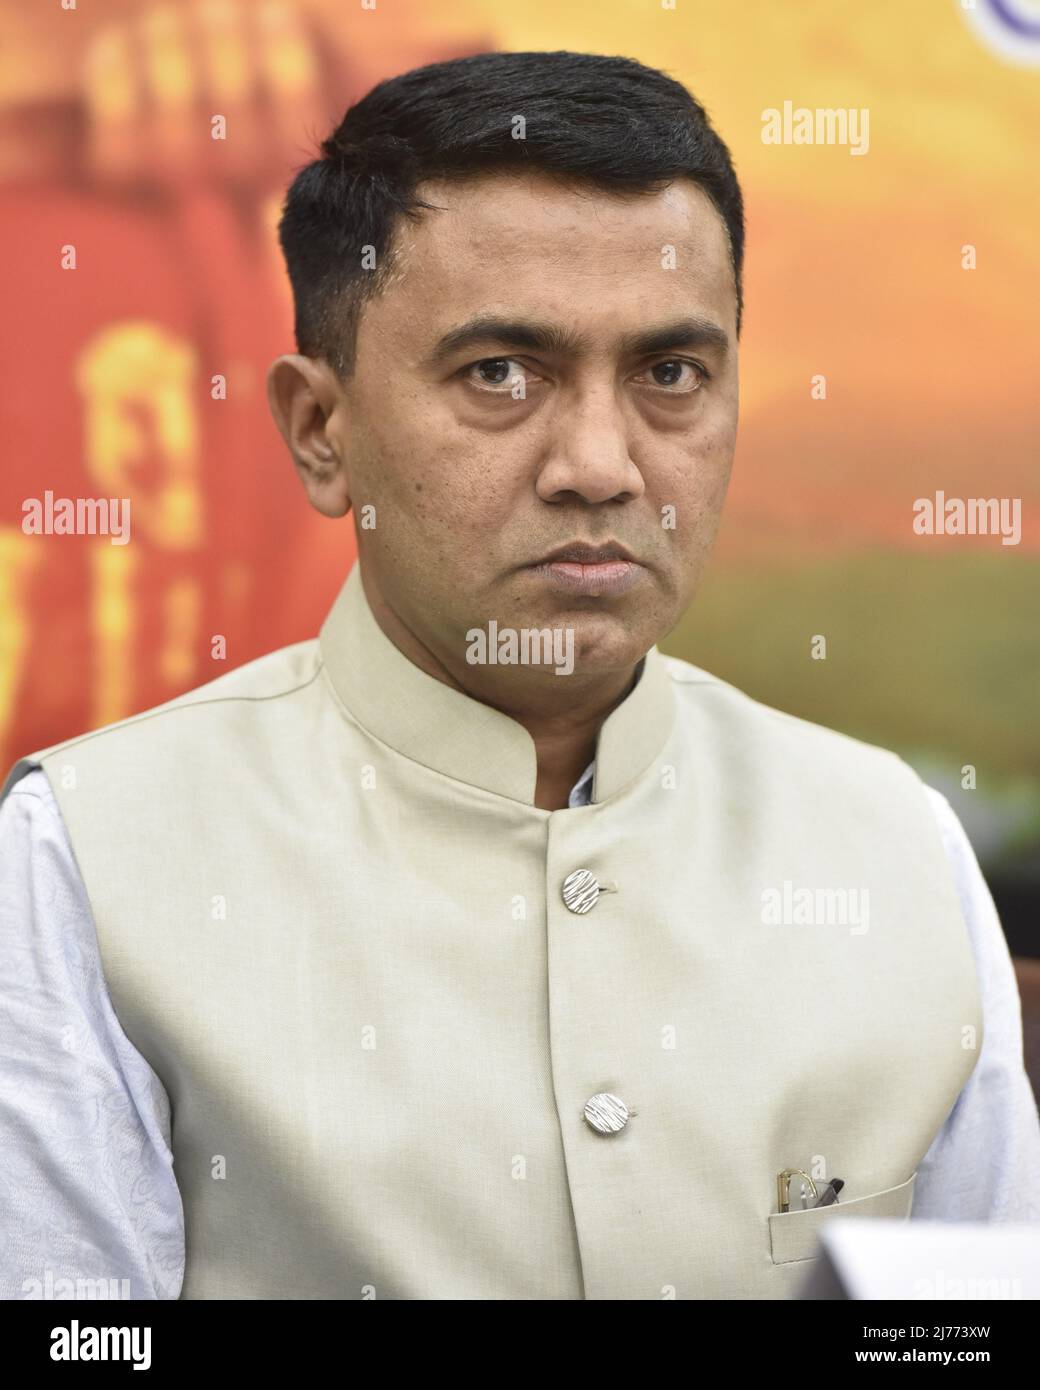 NEW DELHI, INDIA - MAY 6: Chief Minister of Goa Pramod Sawant, during the Inaugurating the Adiguru Shankaracharya Jayanti Celebrations at Constitution Club of India on May 6, 2022 in New Delhi, India. May 6 marks the 1234th birth anniversary of Adi Shankaracharya. Adi Shankara, also known as Jagatguru Shankaracharya, continues to be one of the significant religious leaders and philosophers of India (Photo by Sonu Mehta/Hindustan Times/Sipa USA) Stock Photo